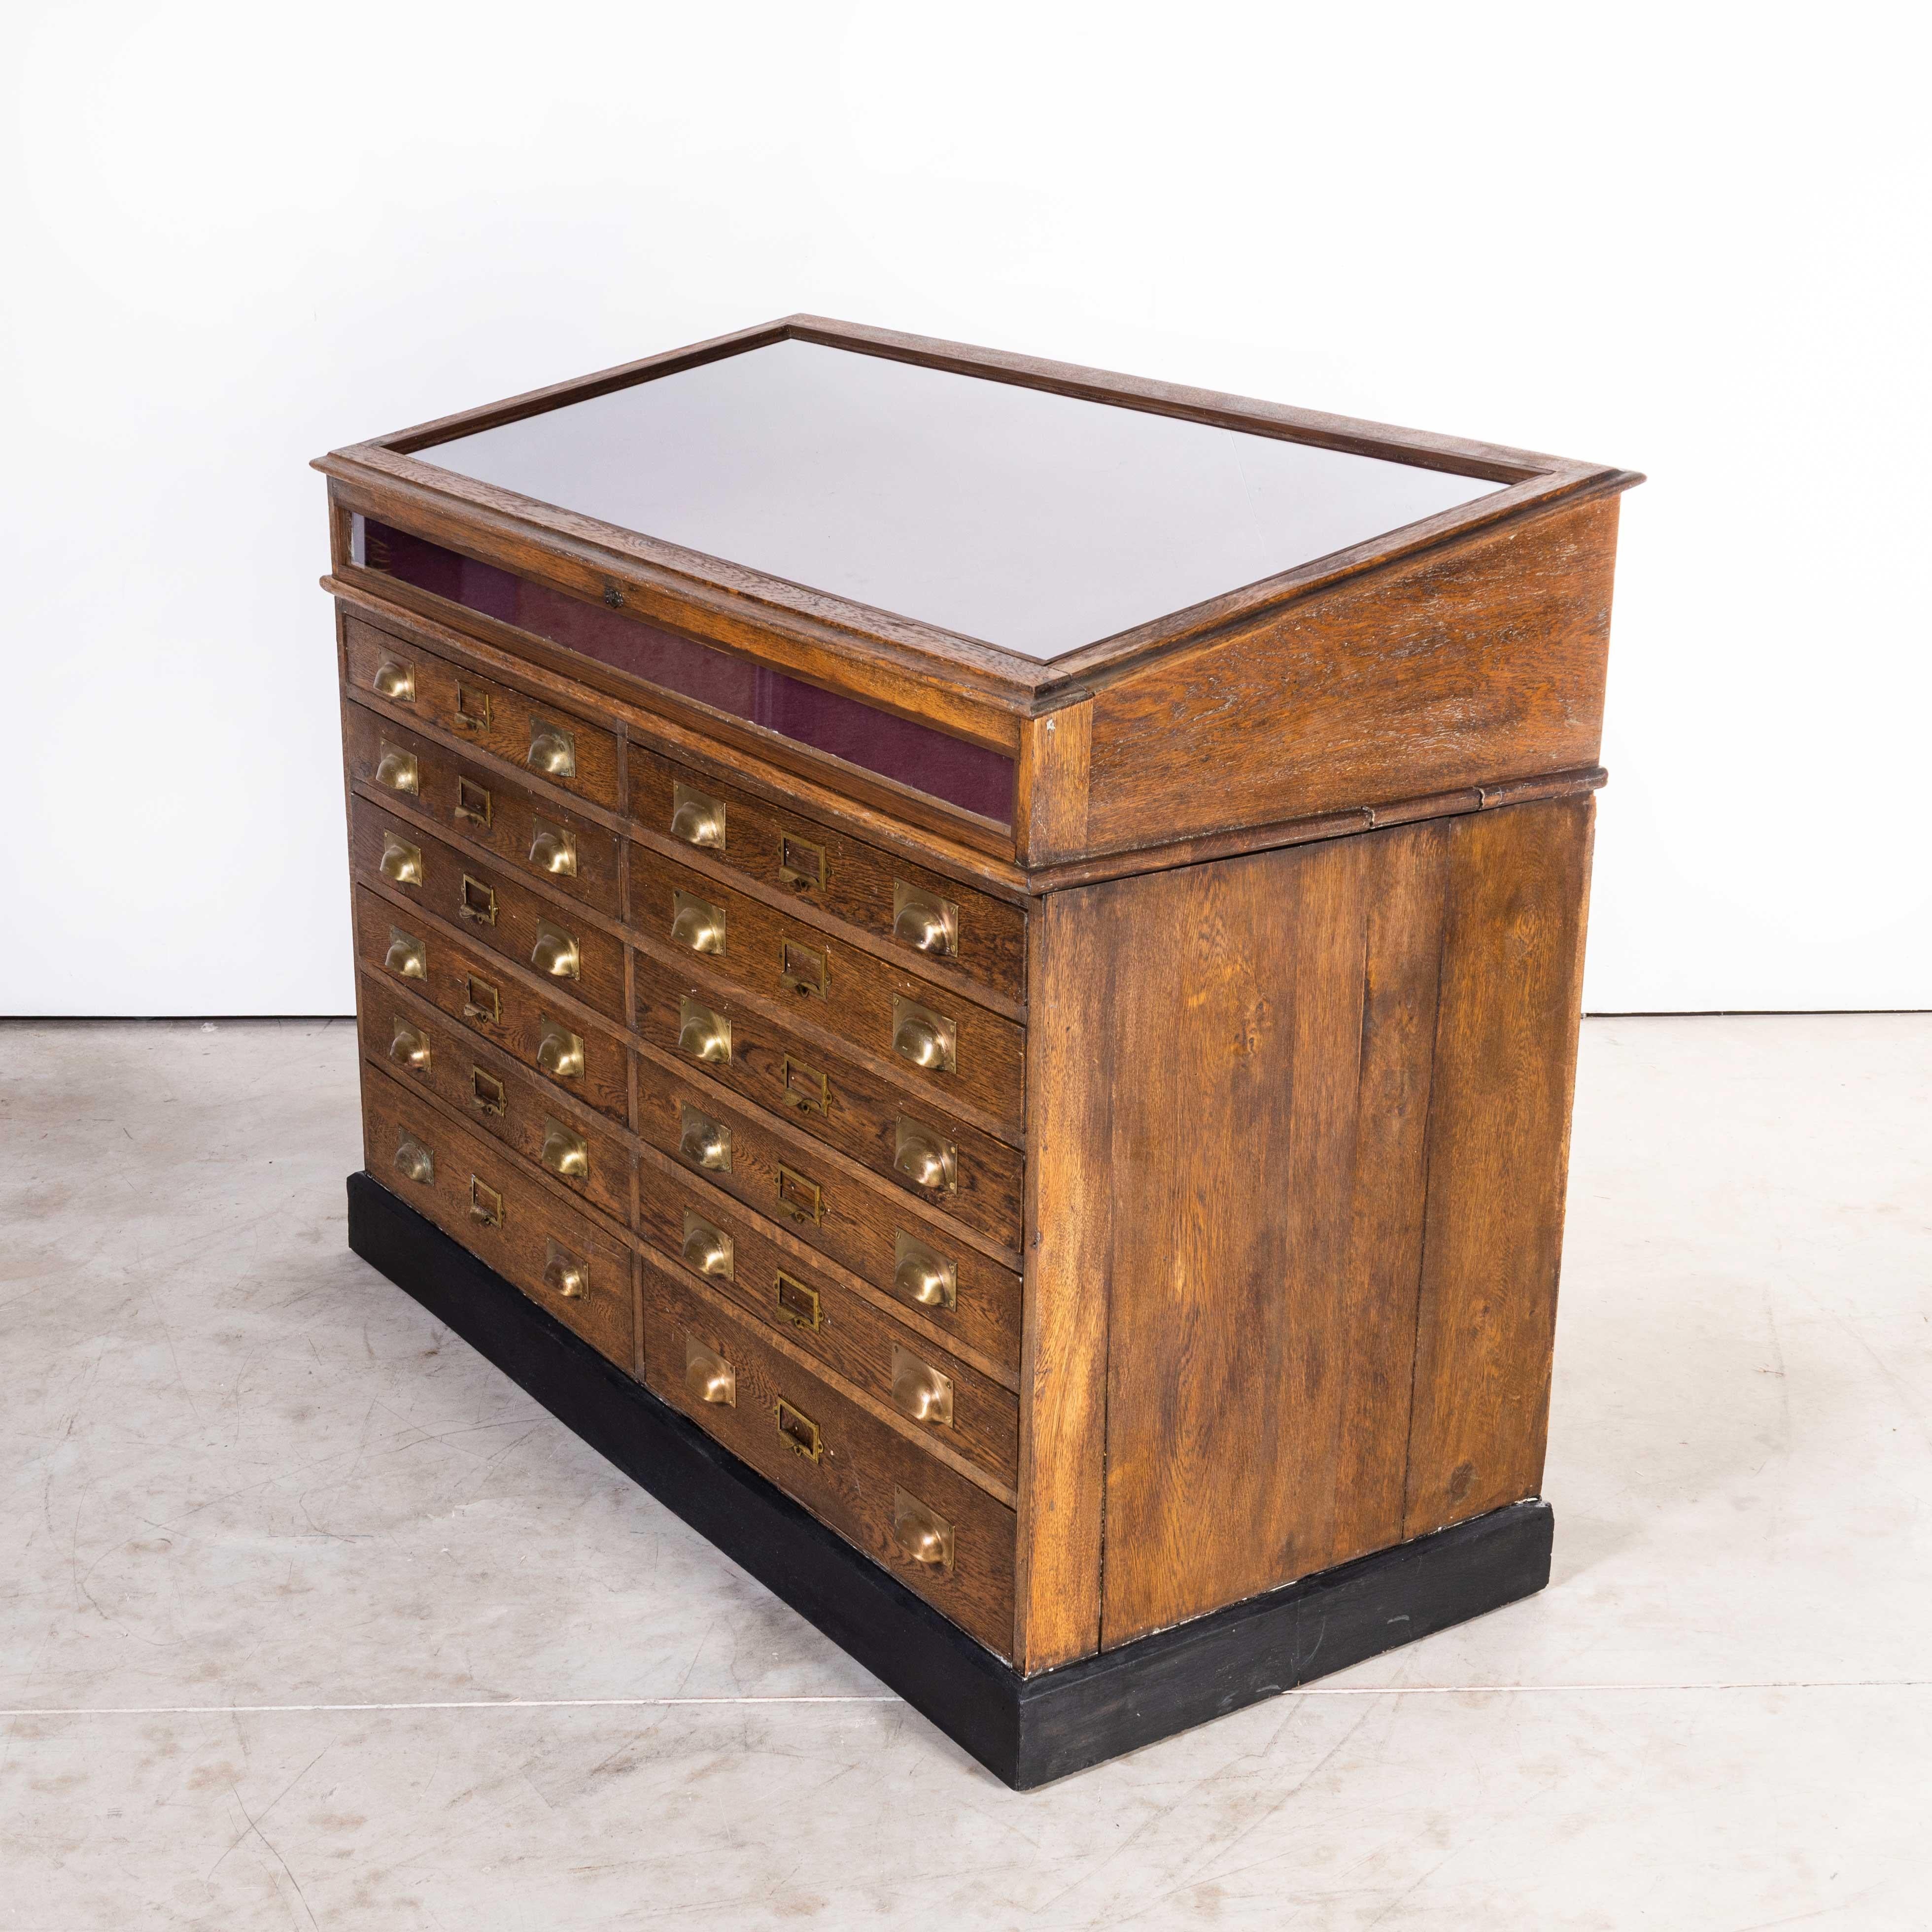 1940’s High quality English oak museum display cabinet – 12 drawers (2152.1)
1940’s High quality English oak museum display cabinet – 12 drawers. Superb quality museum specimen cabinet made with superb craftsmanship. Made throughout in a mixture of